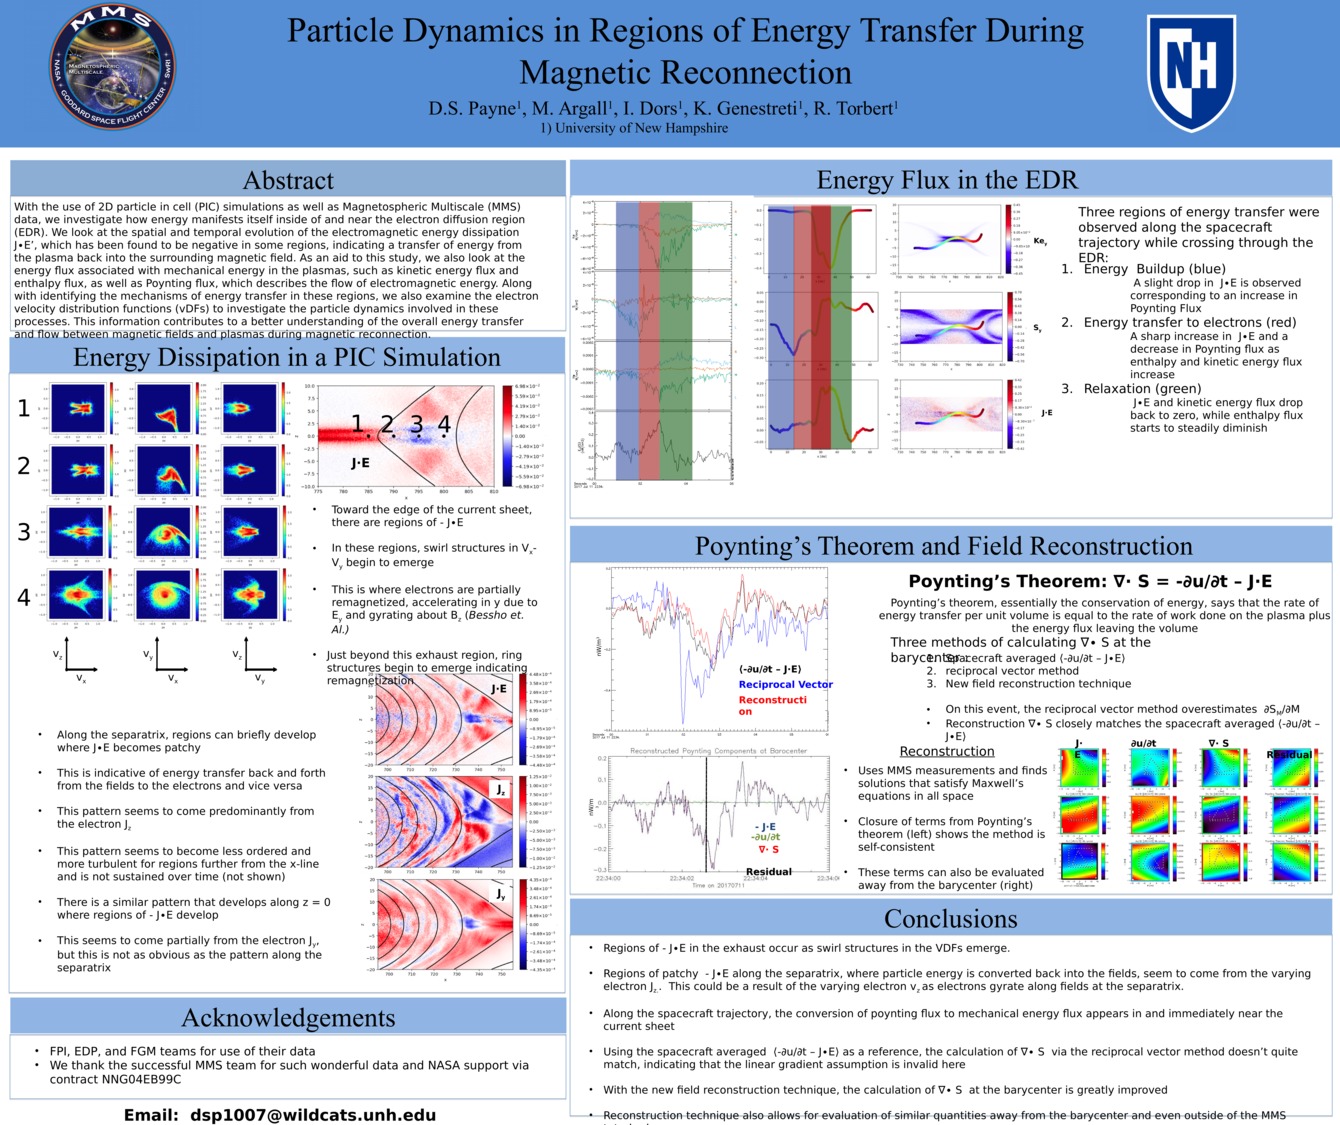 Particle Dynamics In Regions Of Energy Transfer During Magnetic Reconnection by dsp1007